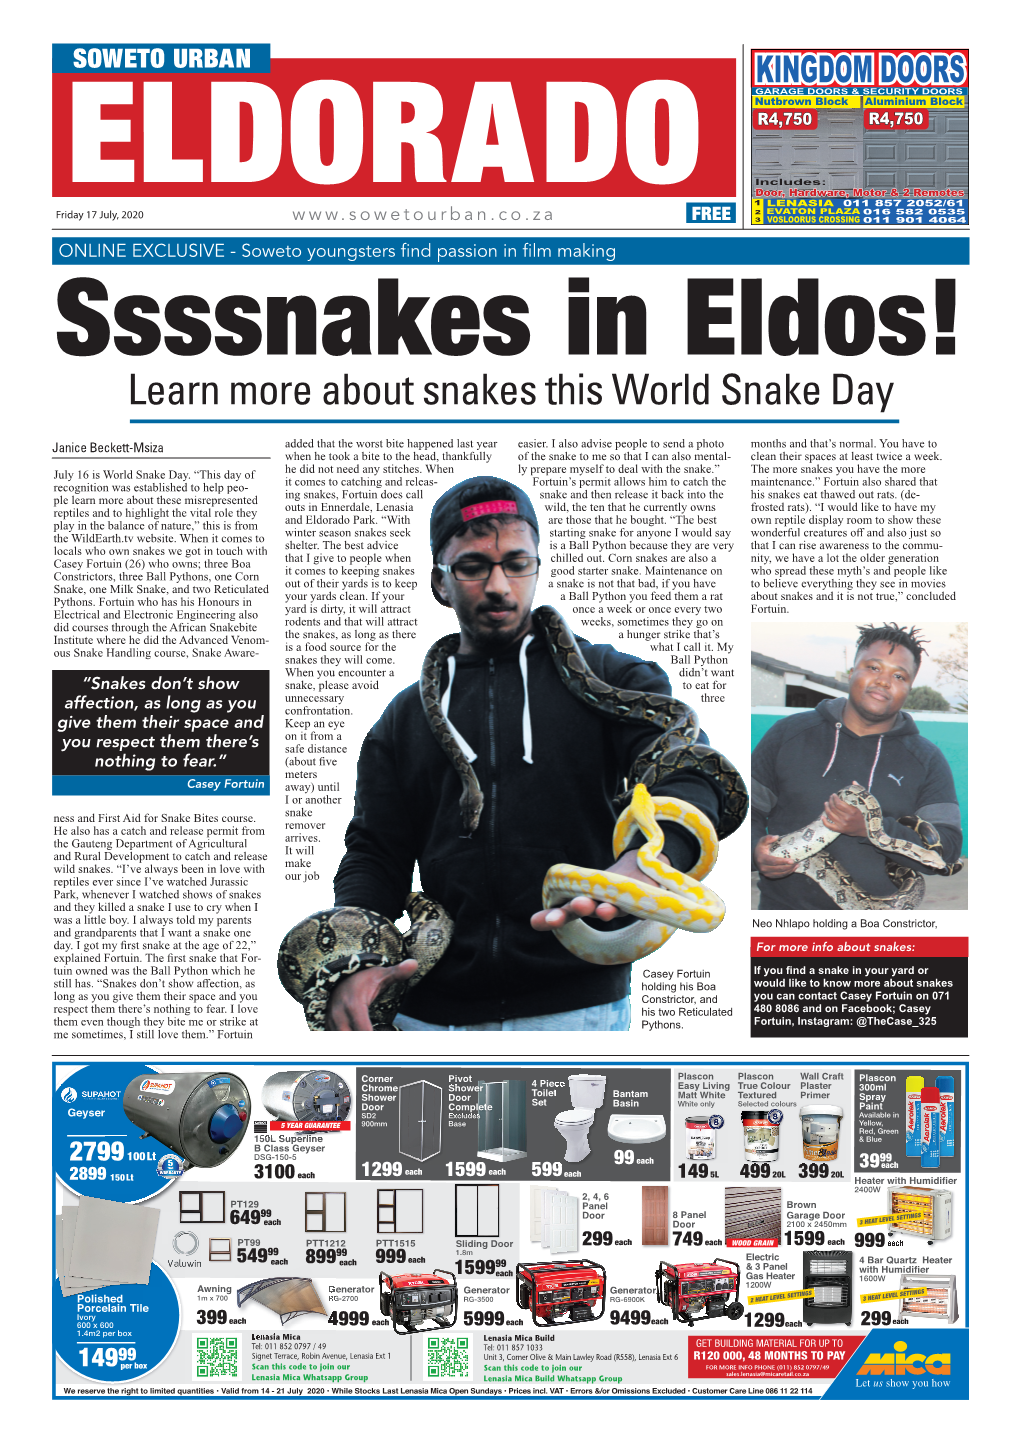 Learn More About Snakes This World Snake Day